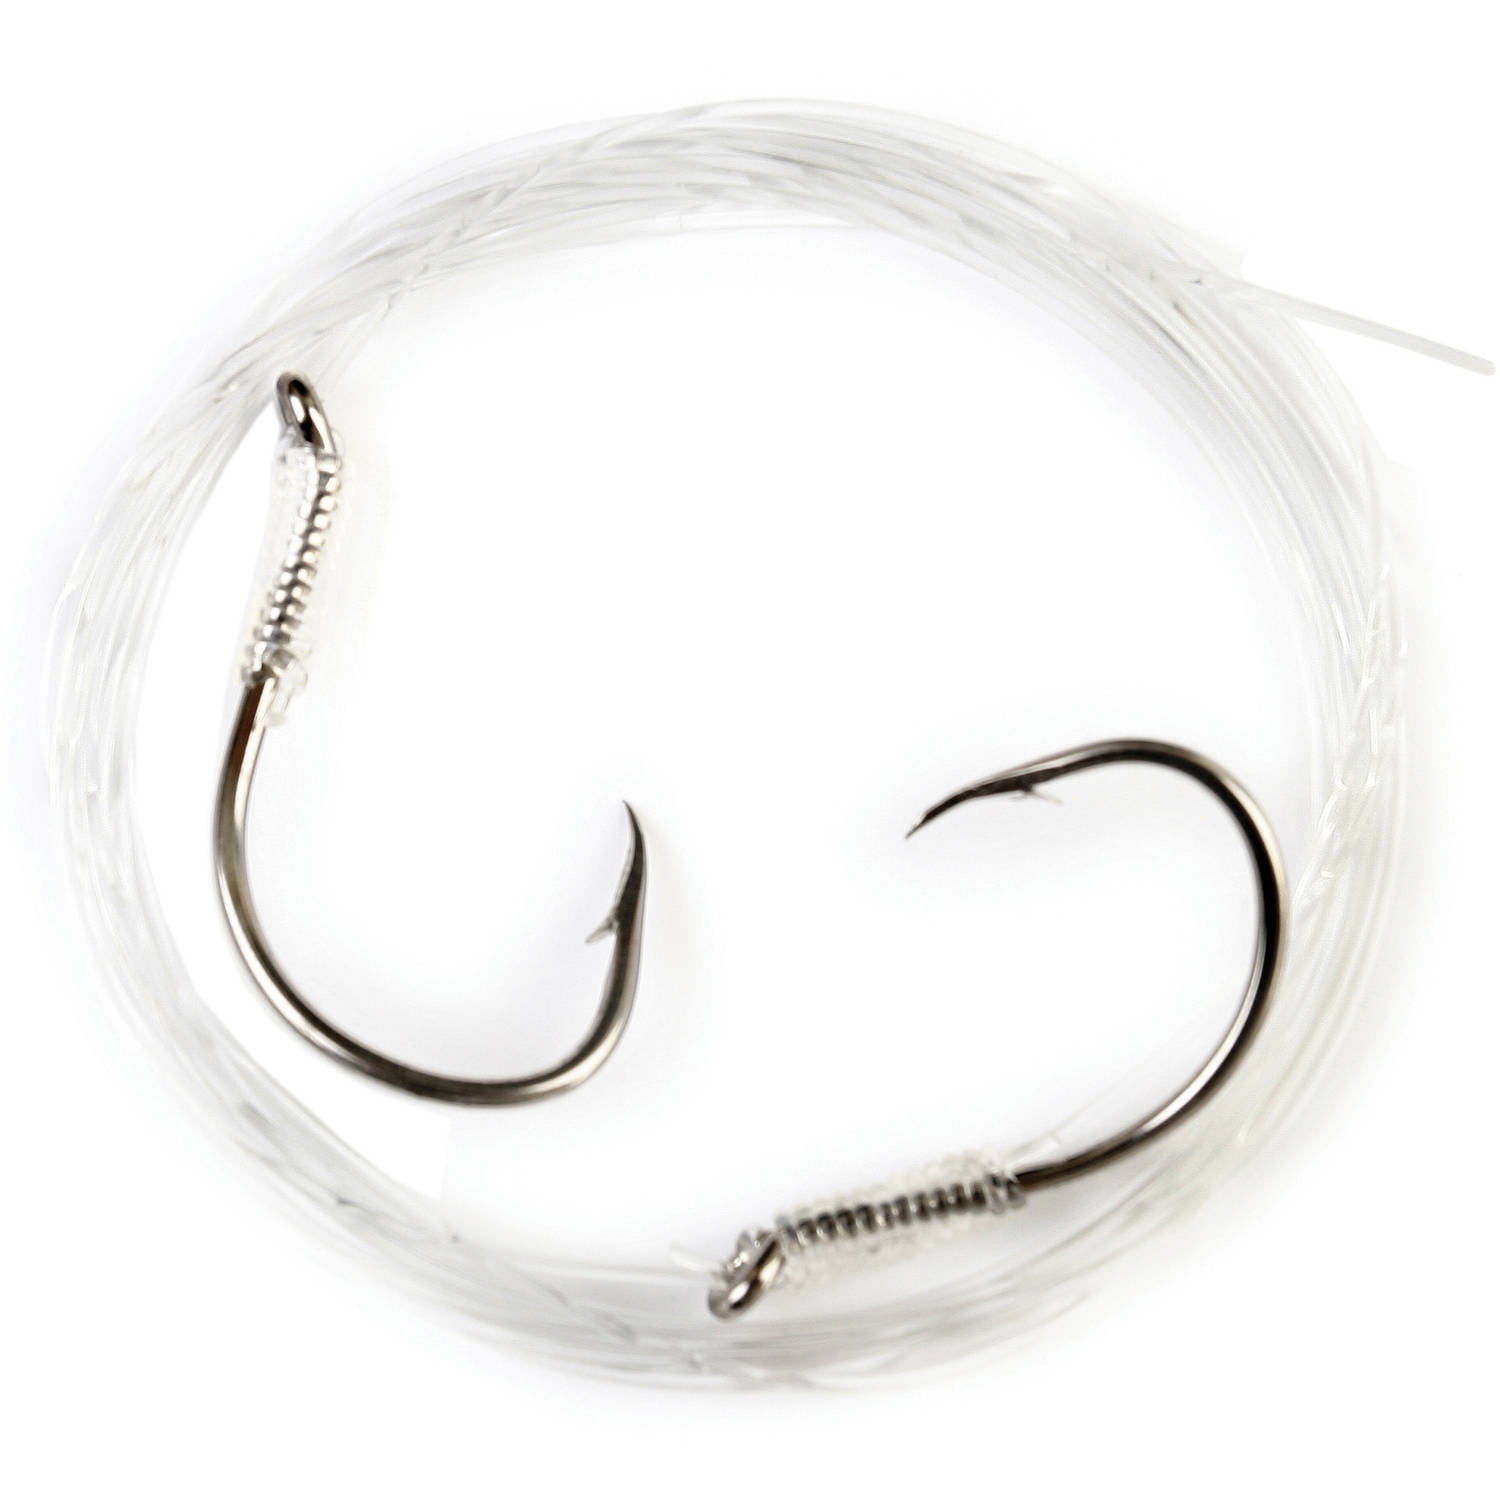 Eagle Claw Lazer Sharp Circle Offset Hook, Sea Guard, Size 3/0, 40 Pack 